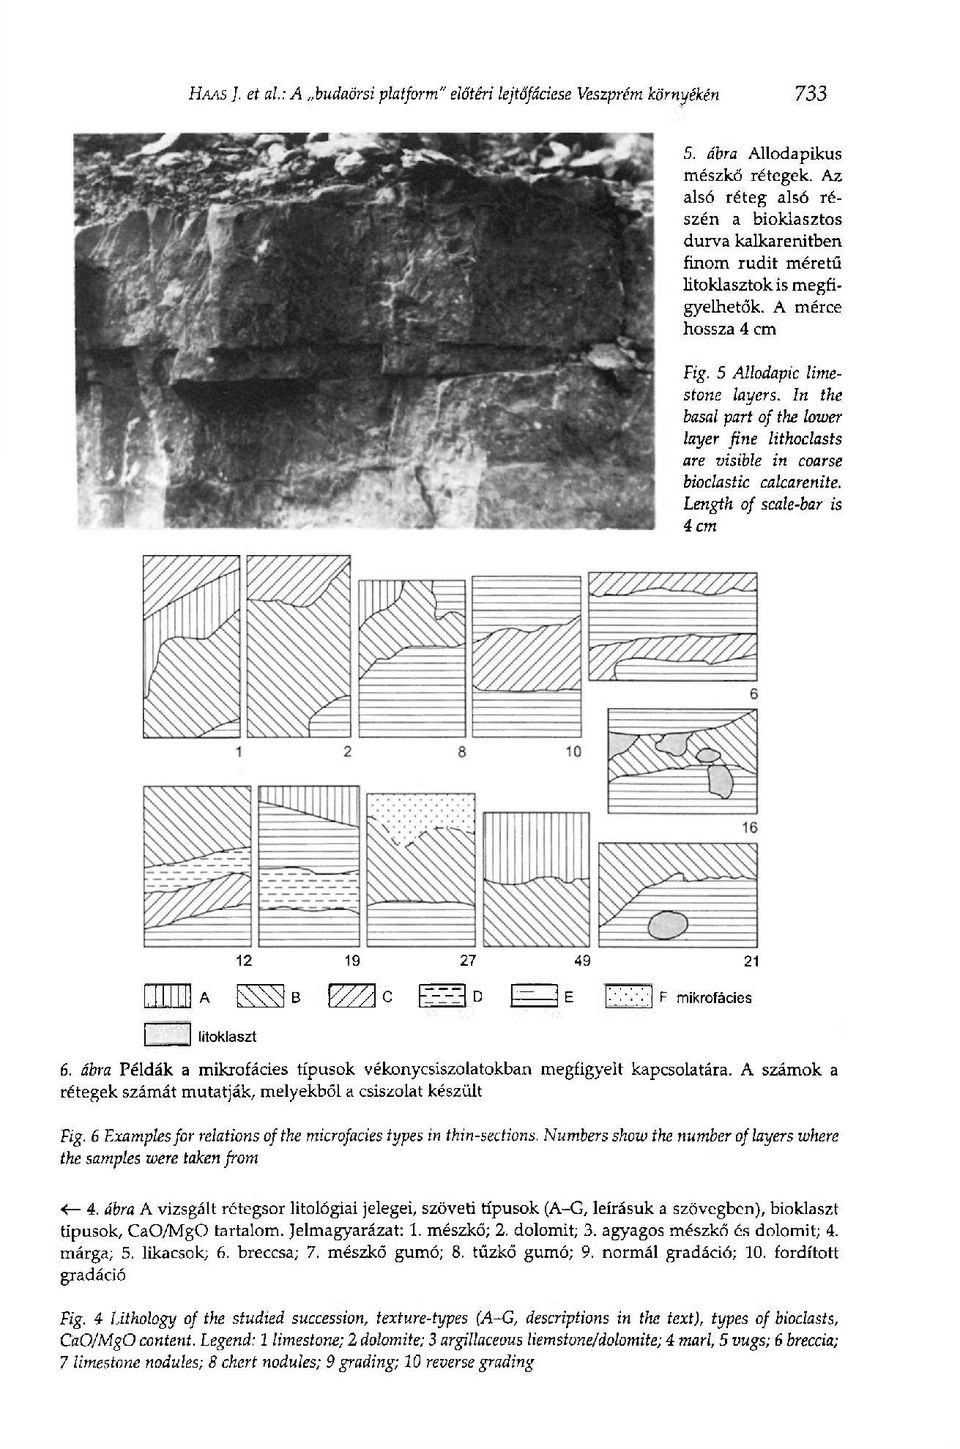 In the basal part of the lower layer fine lithoclasts are visible in coarse bioclastic calcarenite.